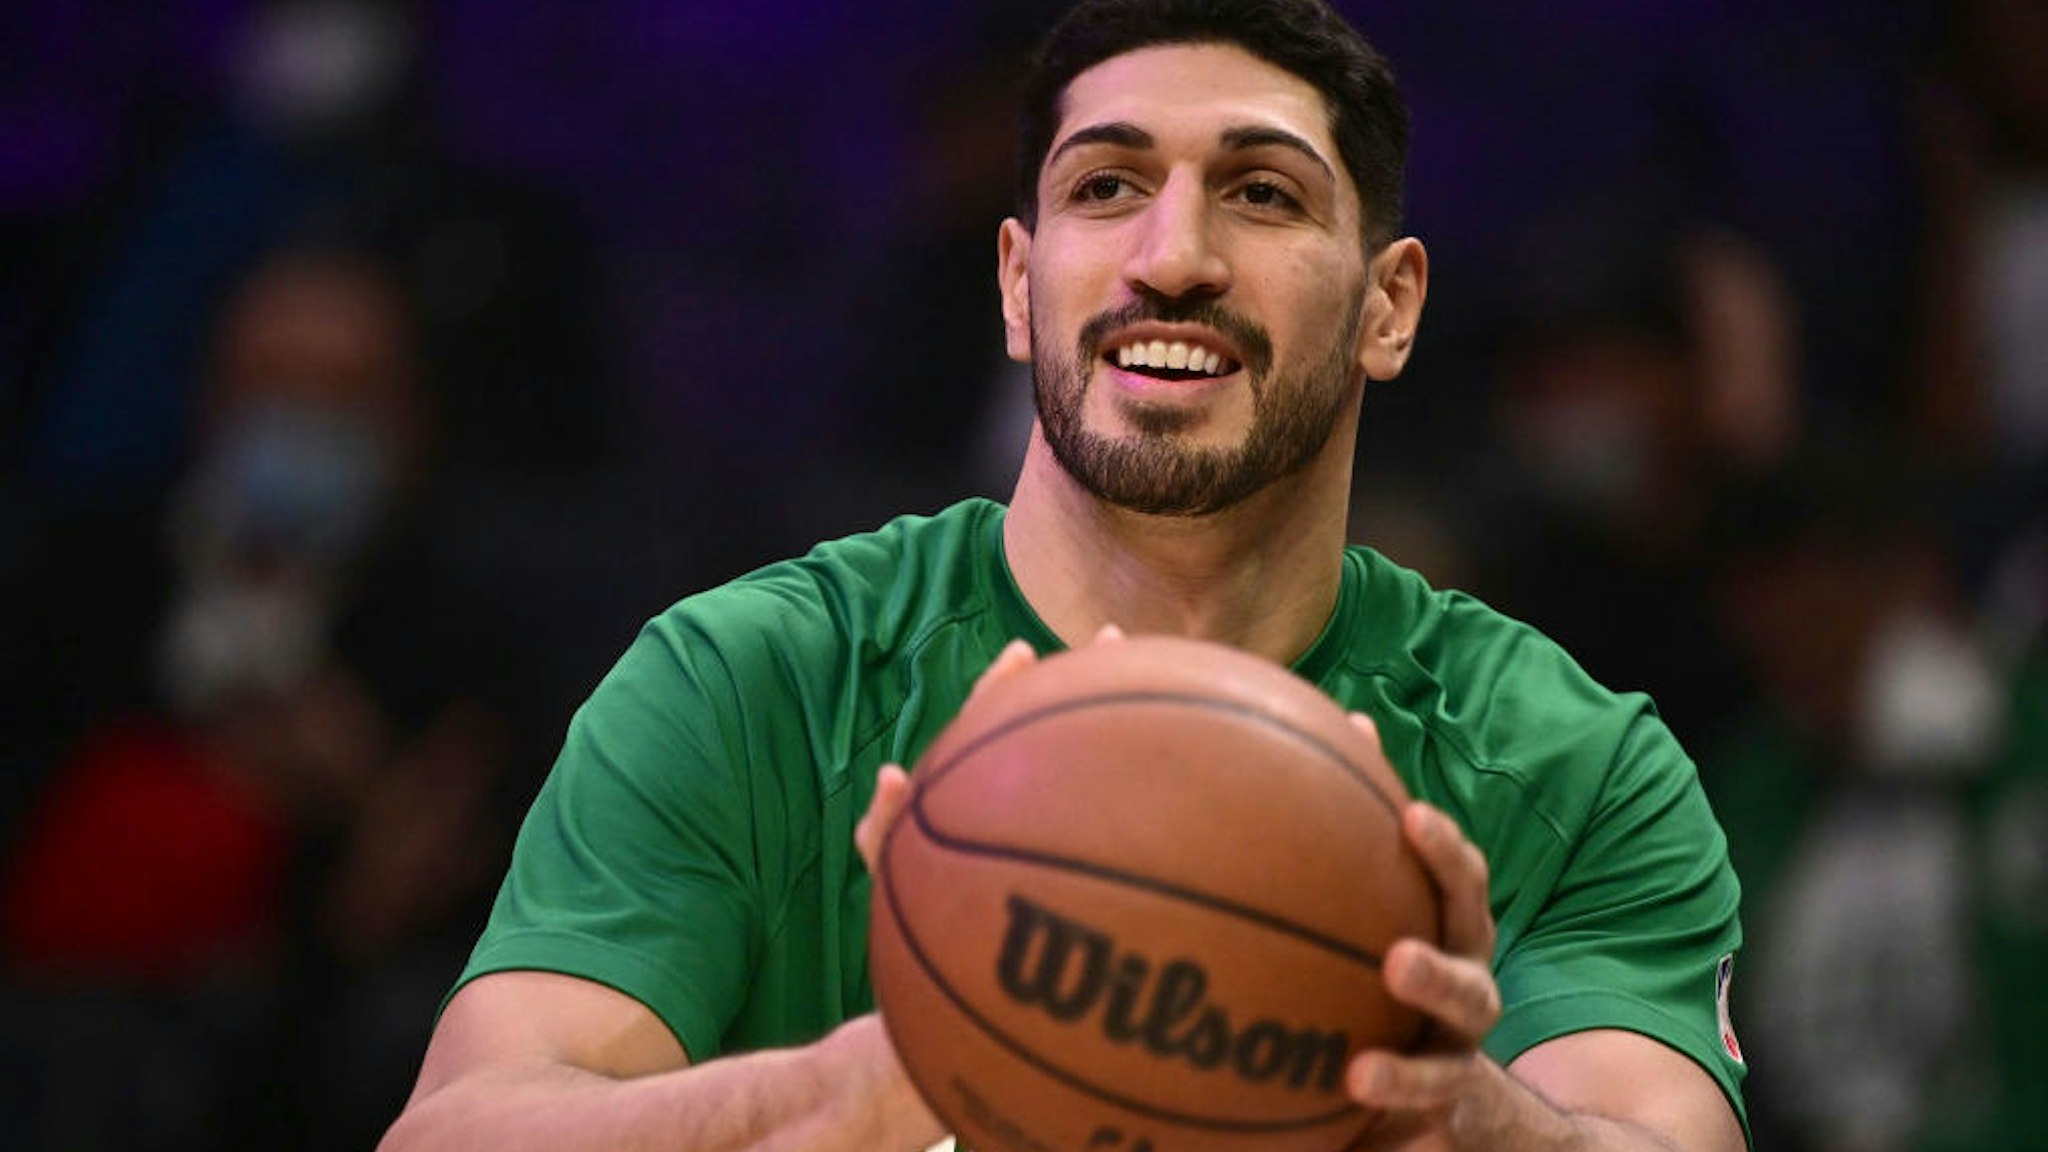 Basketball: Closeup of Boston Celtics Enes Kanter Freedom warming up before game vs Los Angeles Clippers at Staples Center. Los Angeles, CA 12/8/2021 CREDIT: John W. McDonough (Photo by John W. McDonough/Sports Illustrated/Getty Images) (Set Number: X163884 TK1)